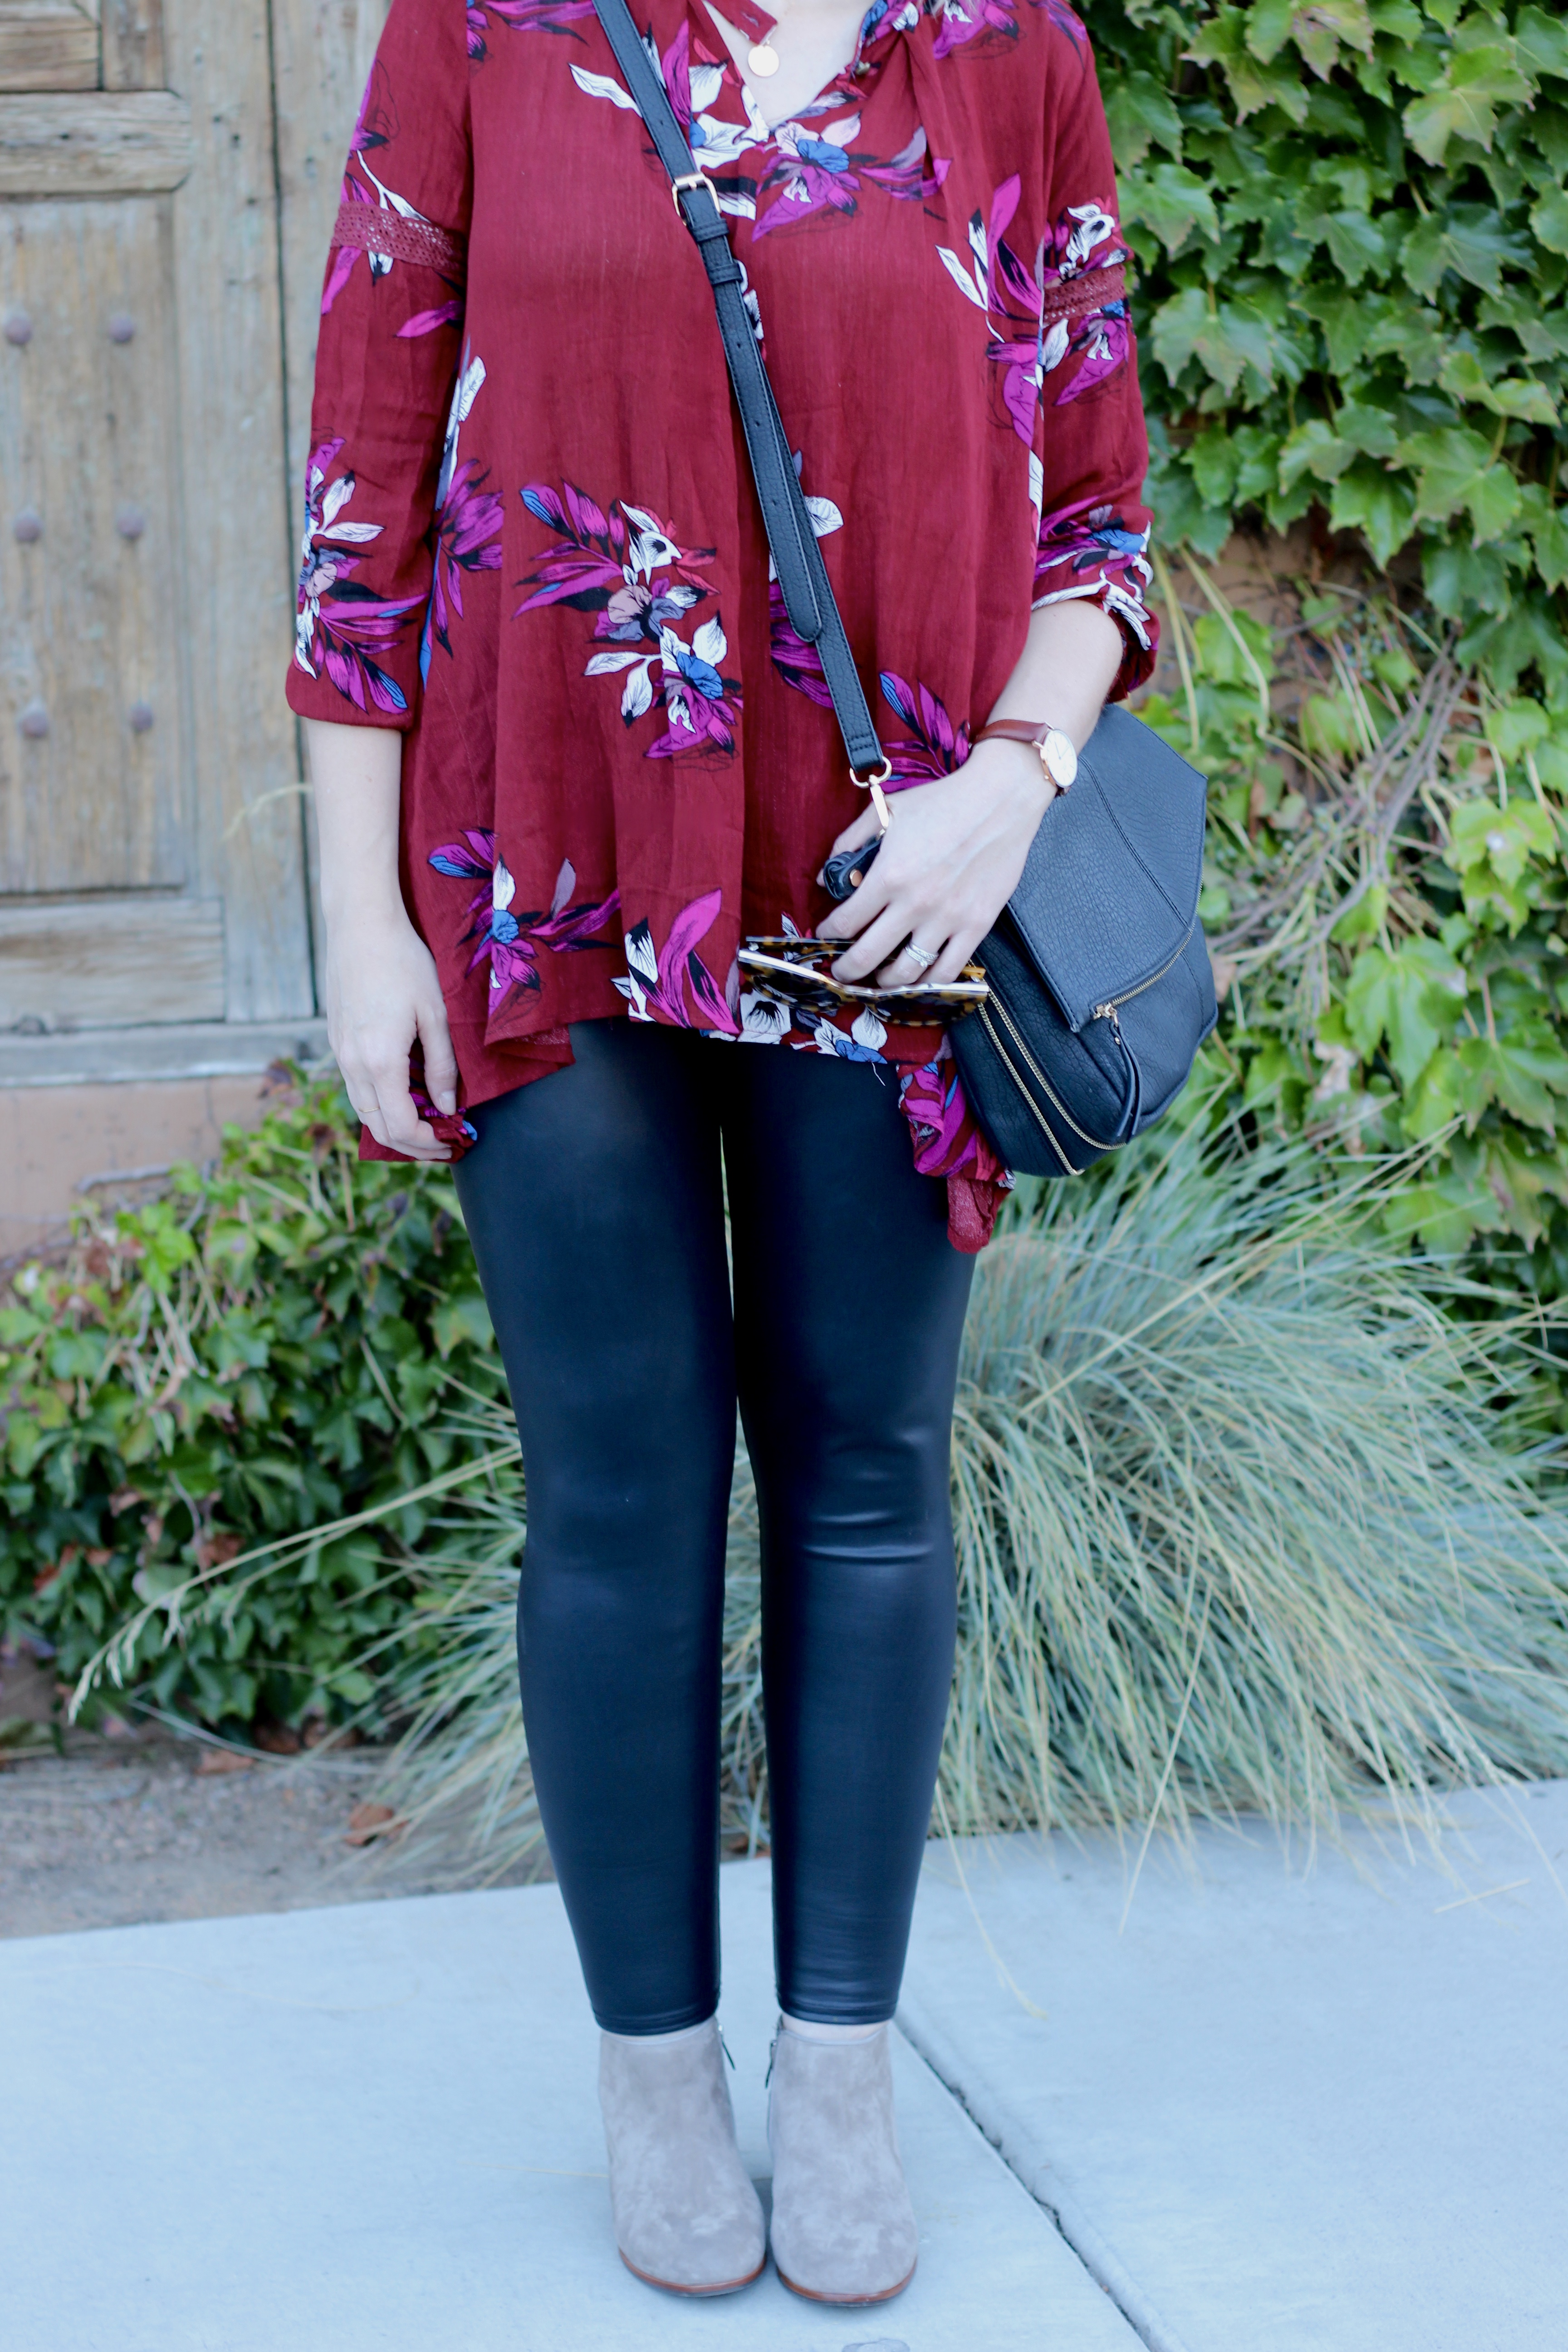 how to wear faux leather leggings #fauxleatherleggings #leatherleggingsoutfit #falloutfit